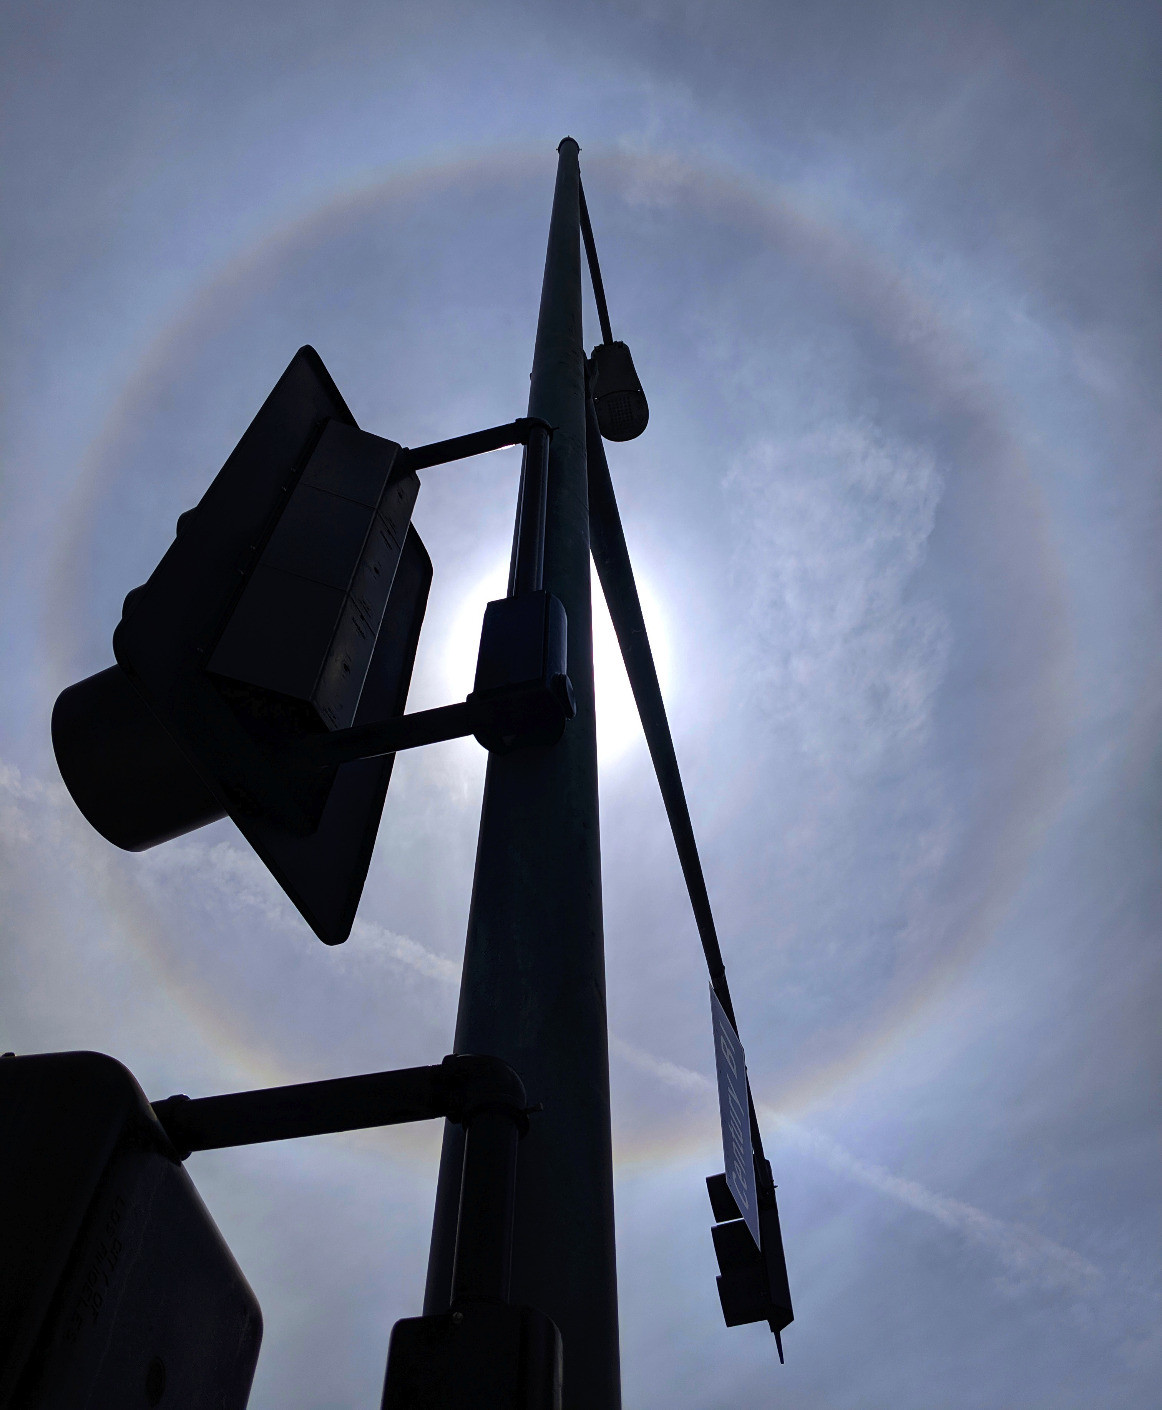 Two views of a 22-degree circular #halo around the sun that I saw on a ...